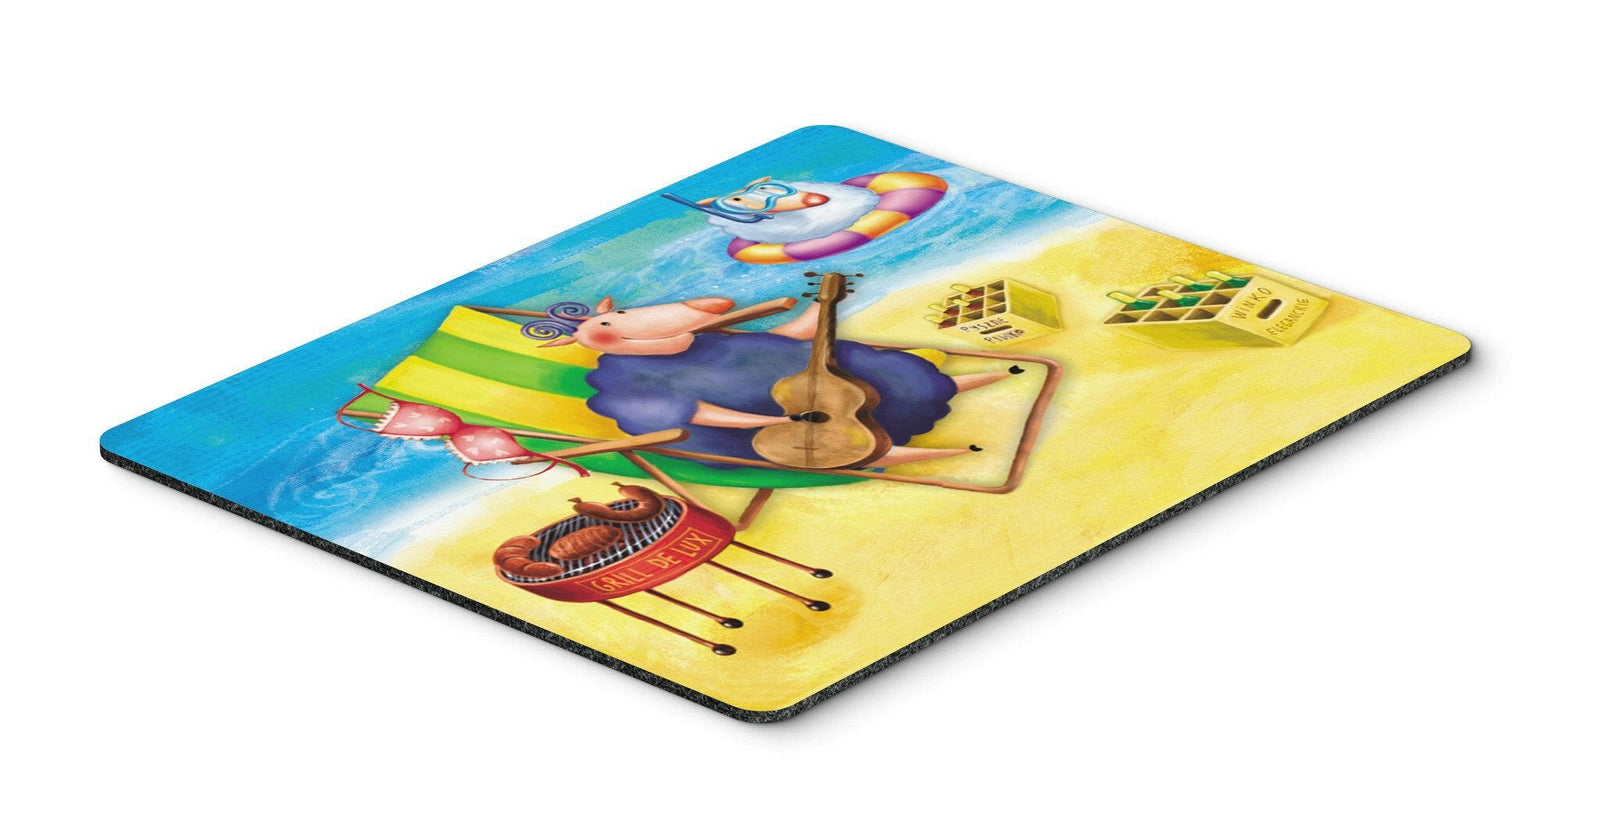 Pig Sunbathing on the Beach Mouse Pad, Hot Pad or Trivet APH0079MP by Caroline's Treasures